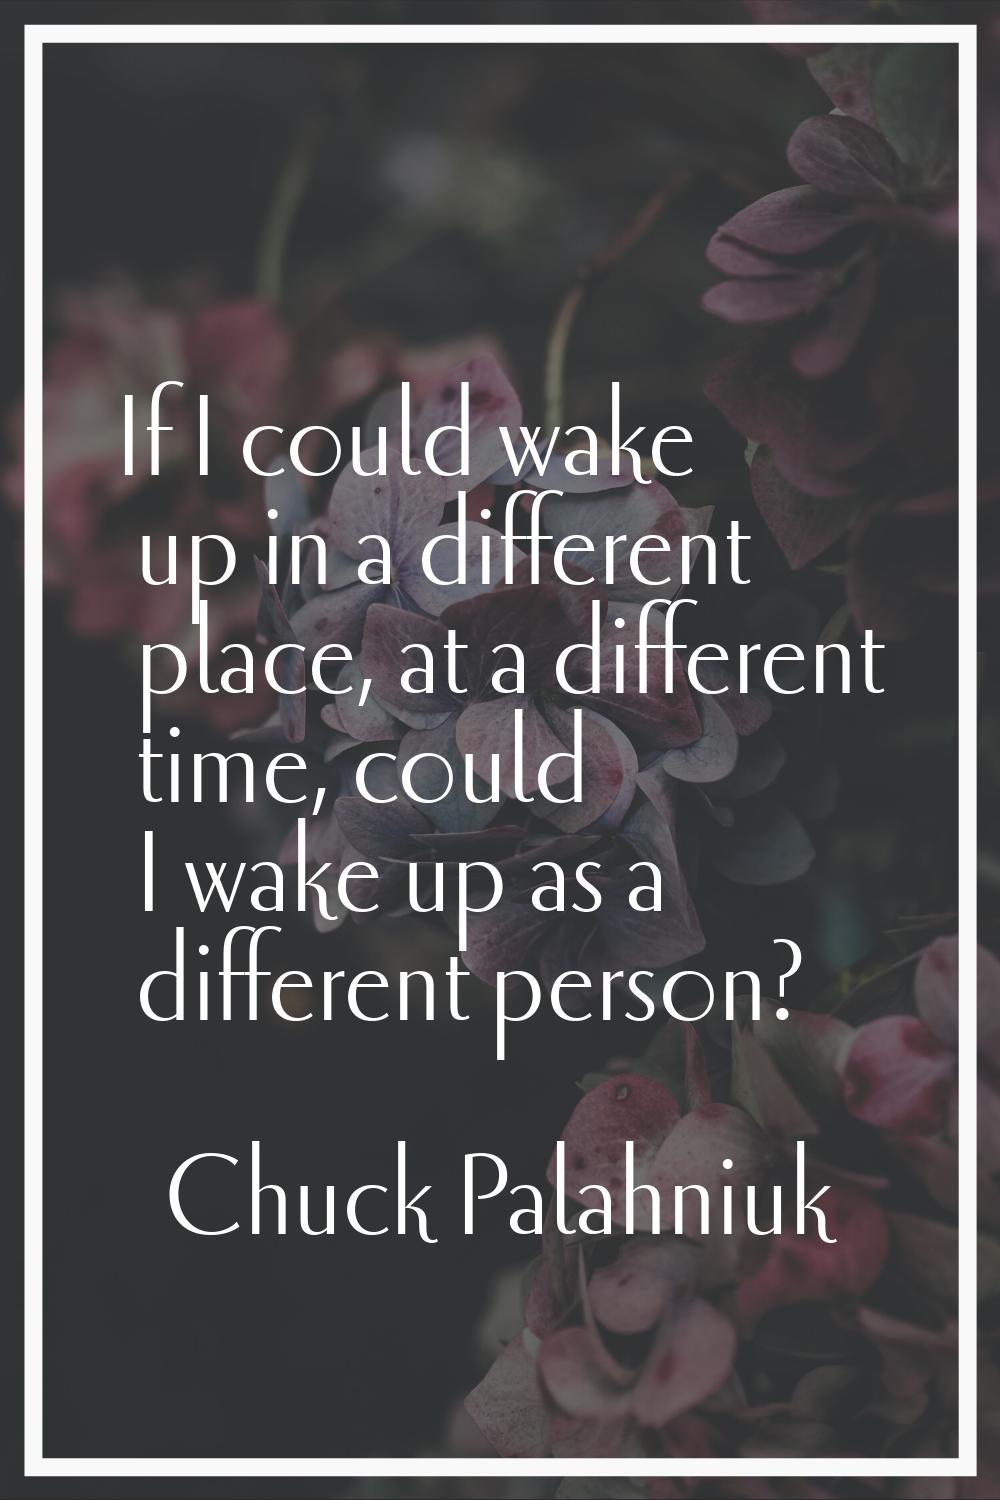 If I could wake up in a different place, at a different time, could I wake up as a different person